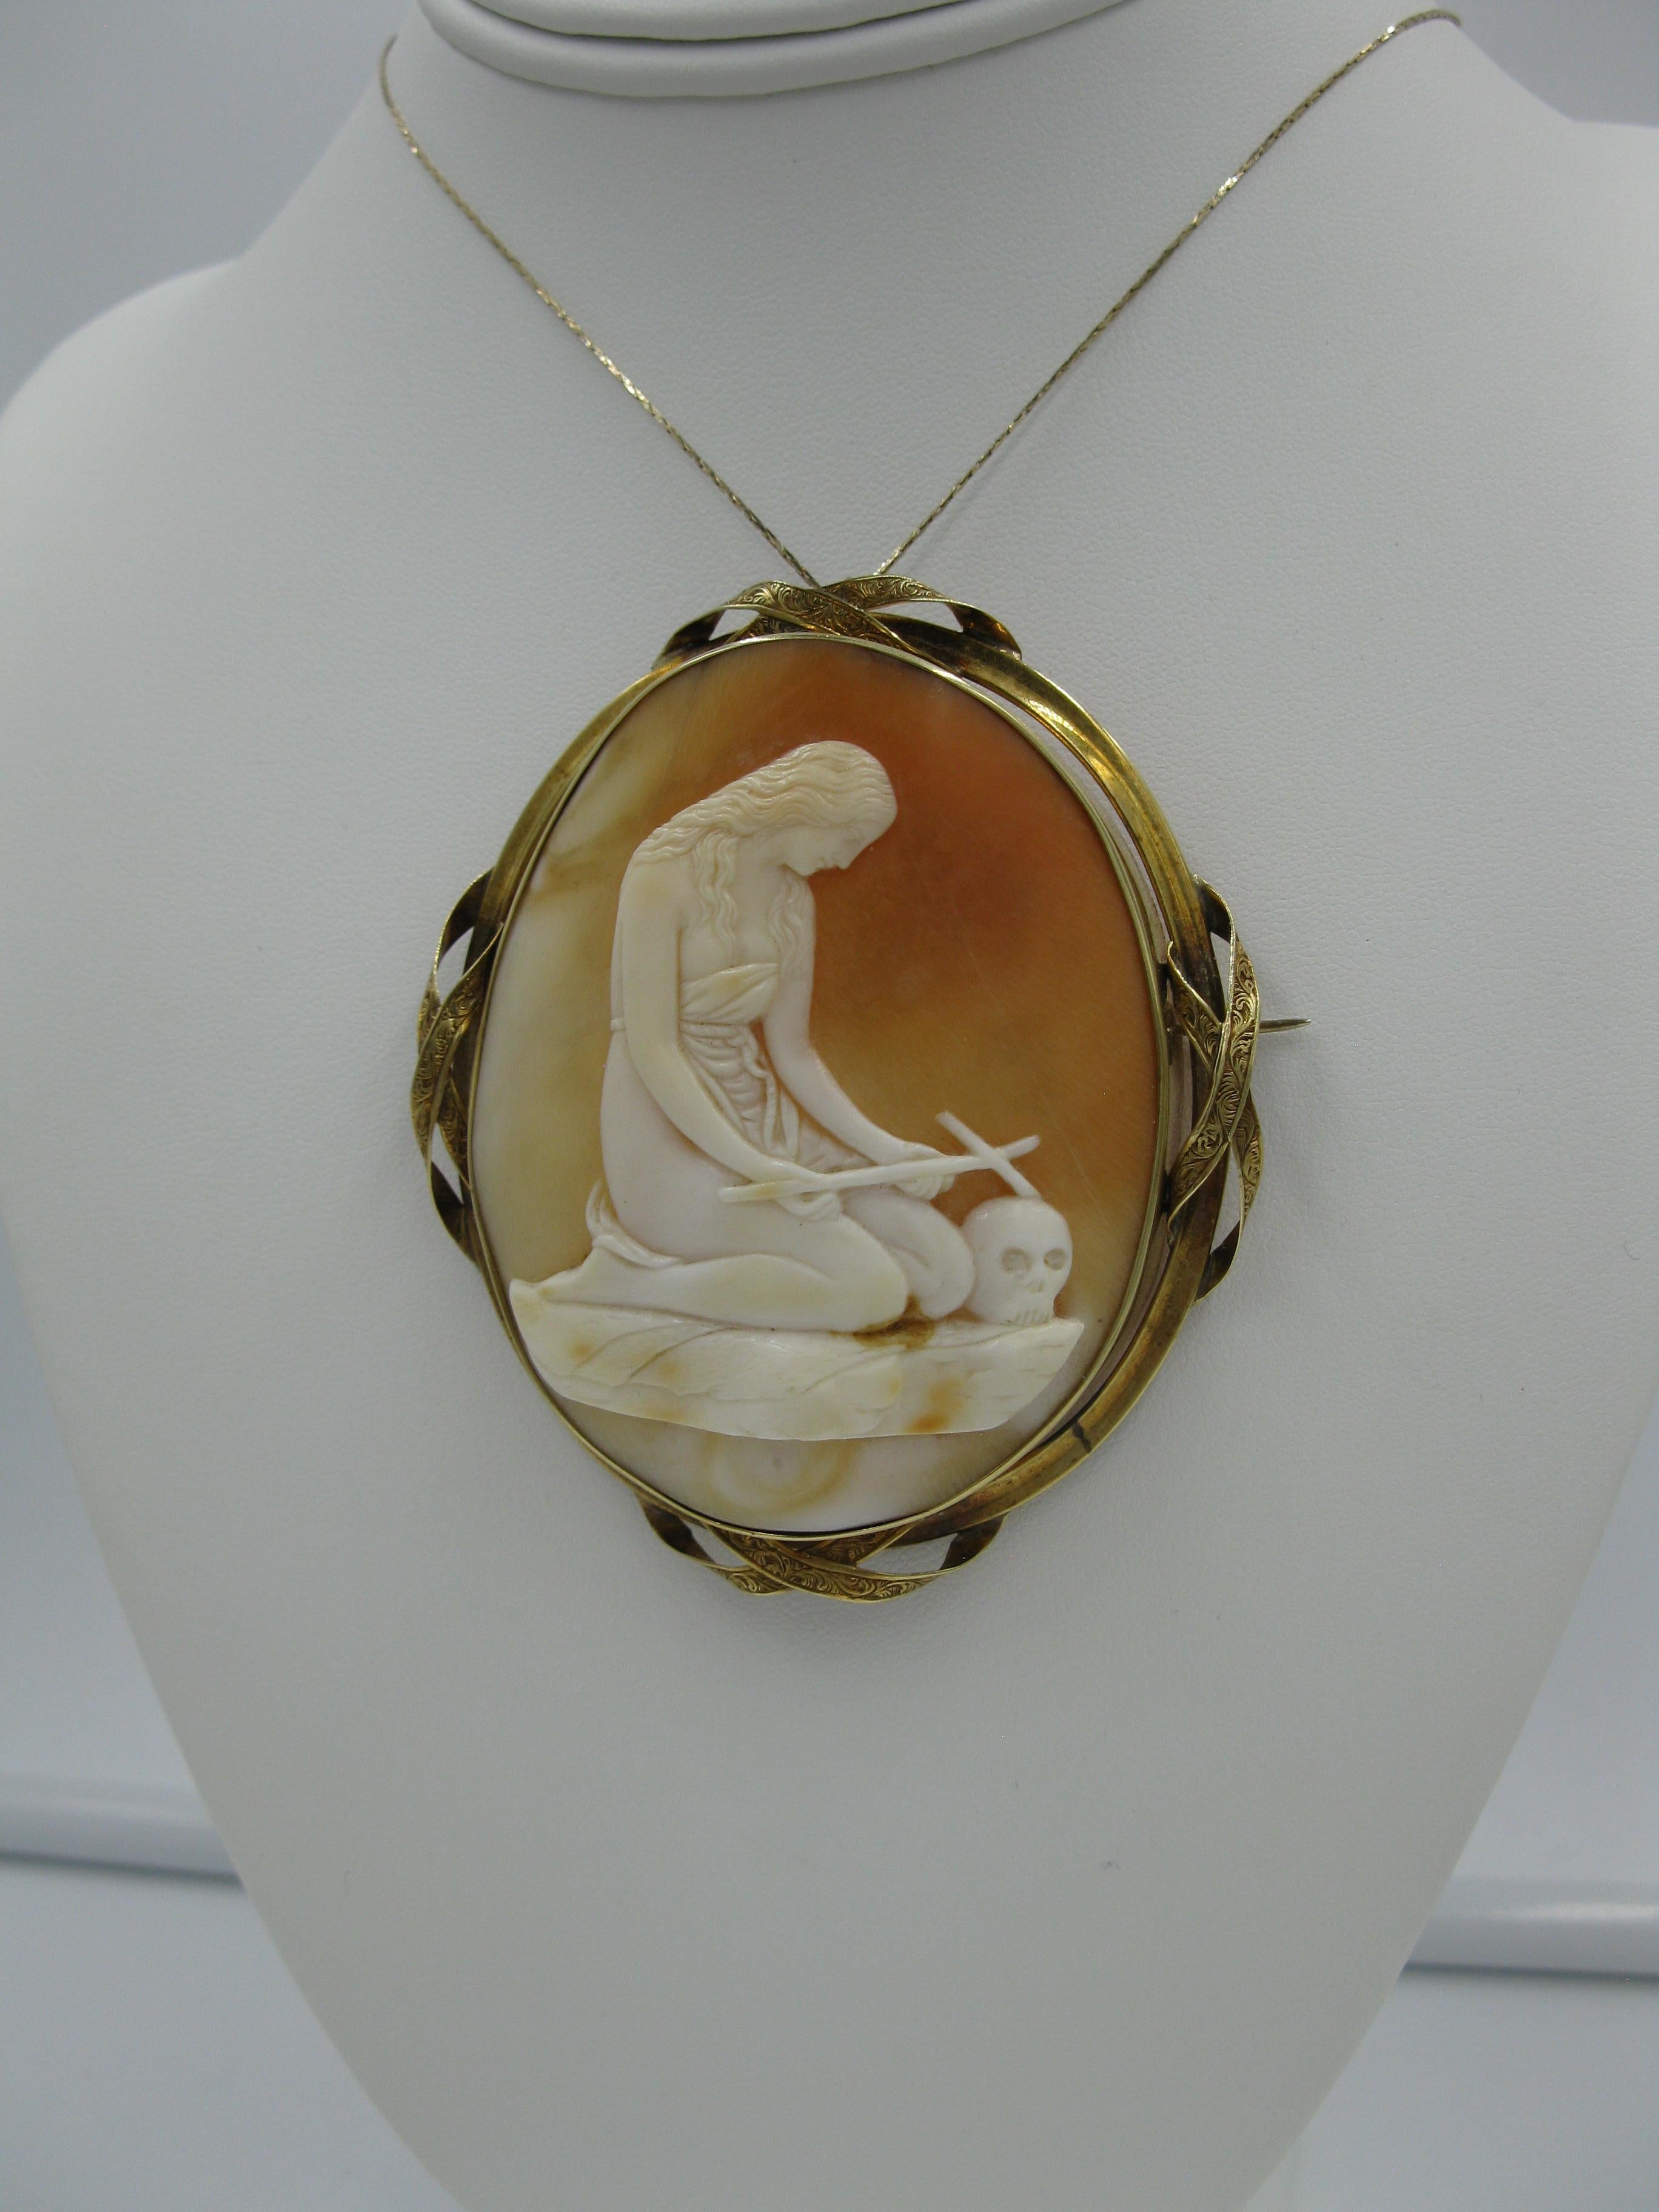 Women's Woman with Cross and Skull Cameo Pendant 14 Karat Gold Victorian Monumental